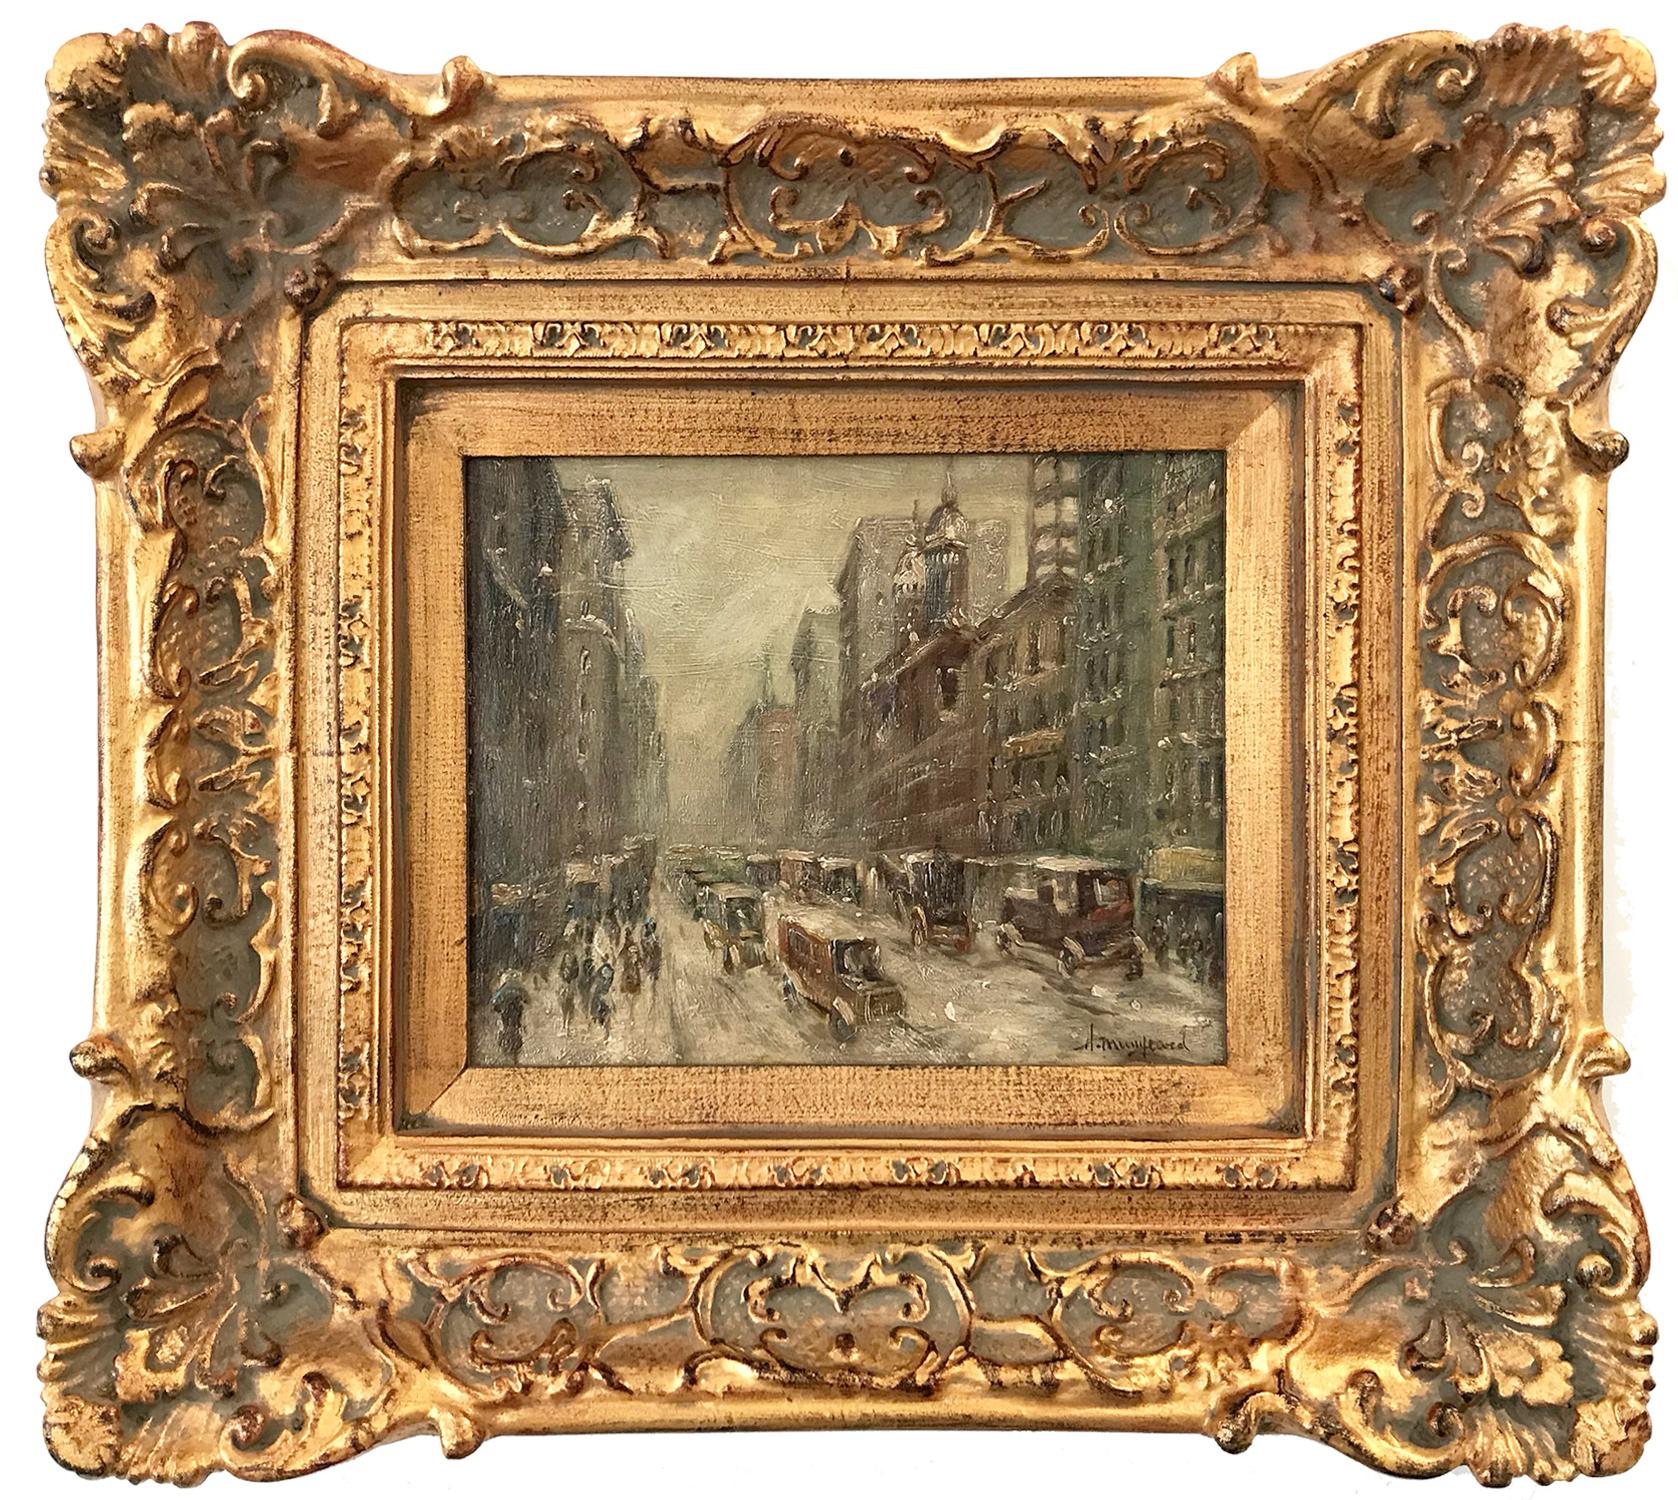 This painting depicts an impressionistic scene of Downtown New York on a snowy day after Guy Wiggins. The artist is unknown but was active in the 20th Century. Beautiful brushwork and whimsical colors. The work captures Manhattan and times of the